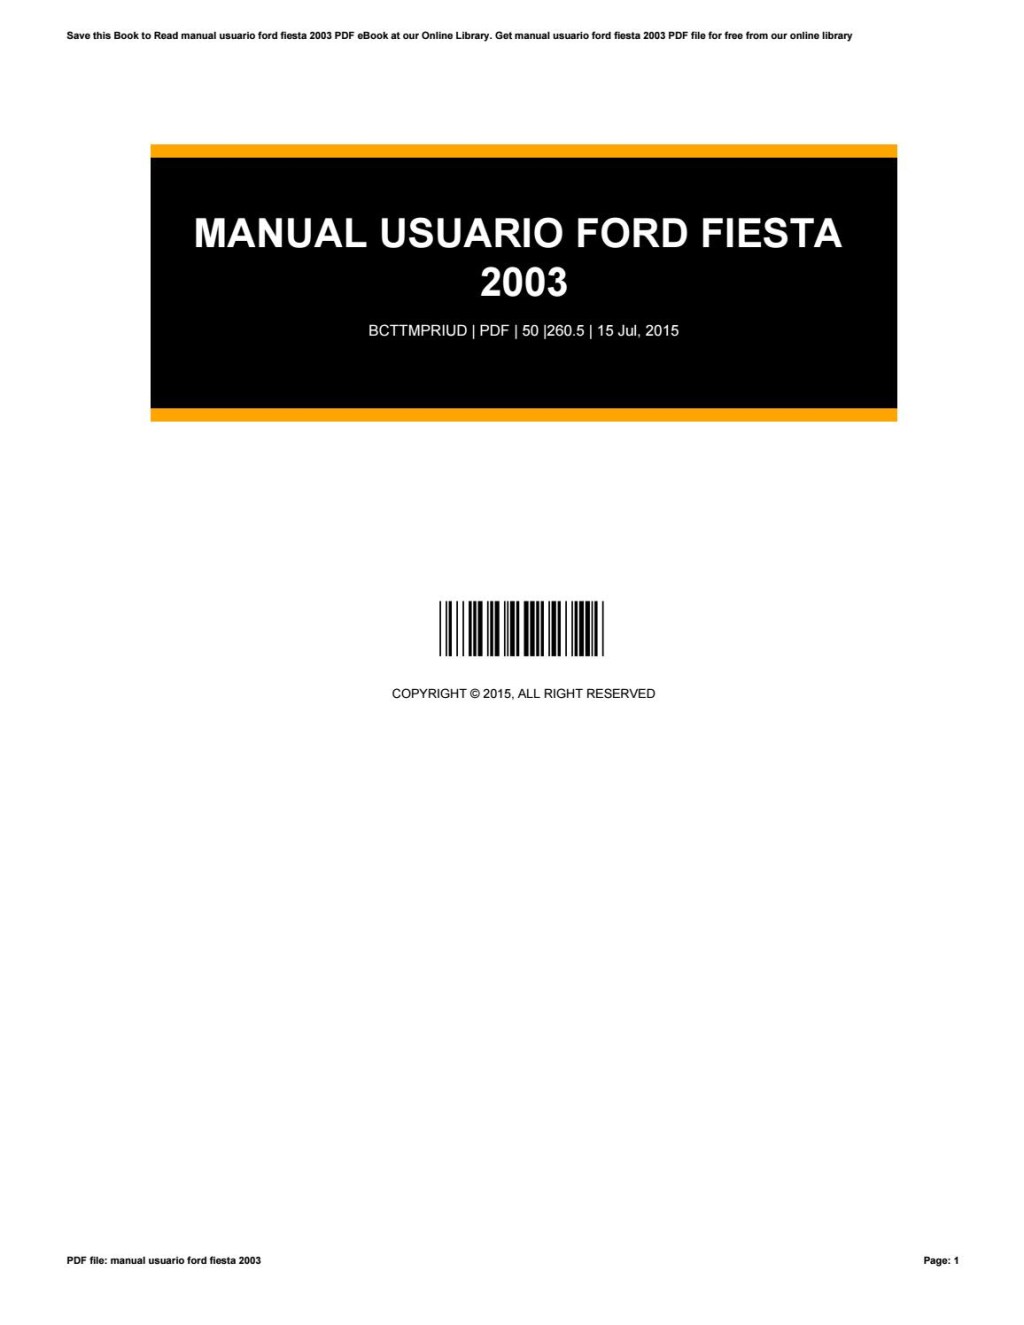 Picture of: Manual usuario ford fiesta  by BrianKnighten – Issuu